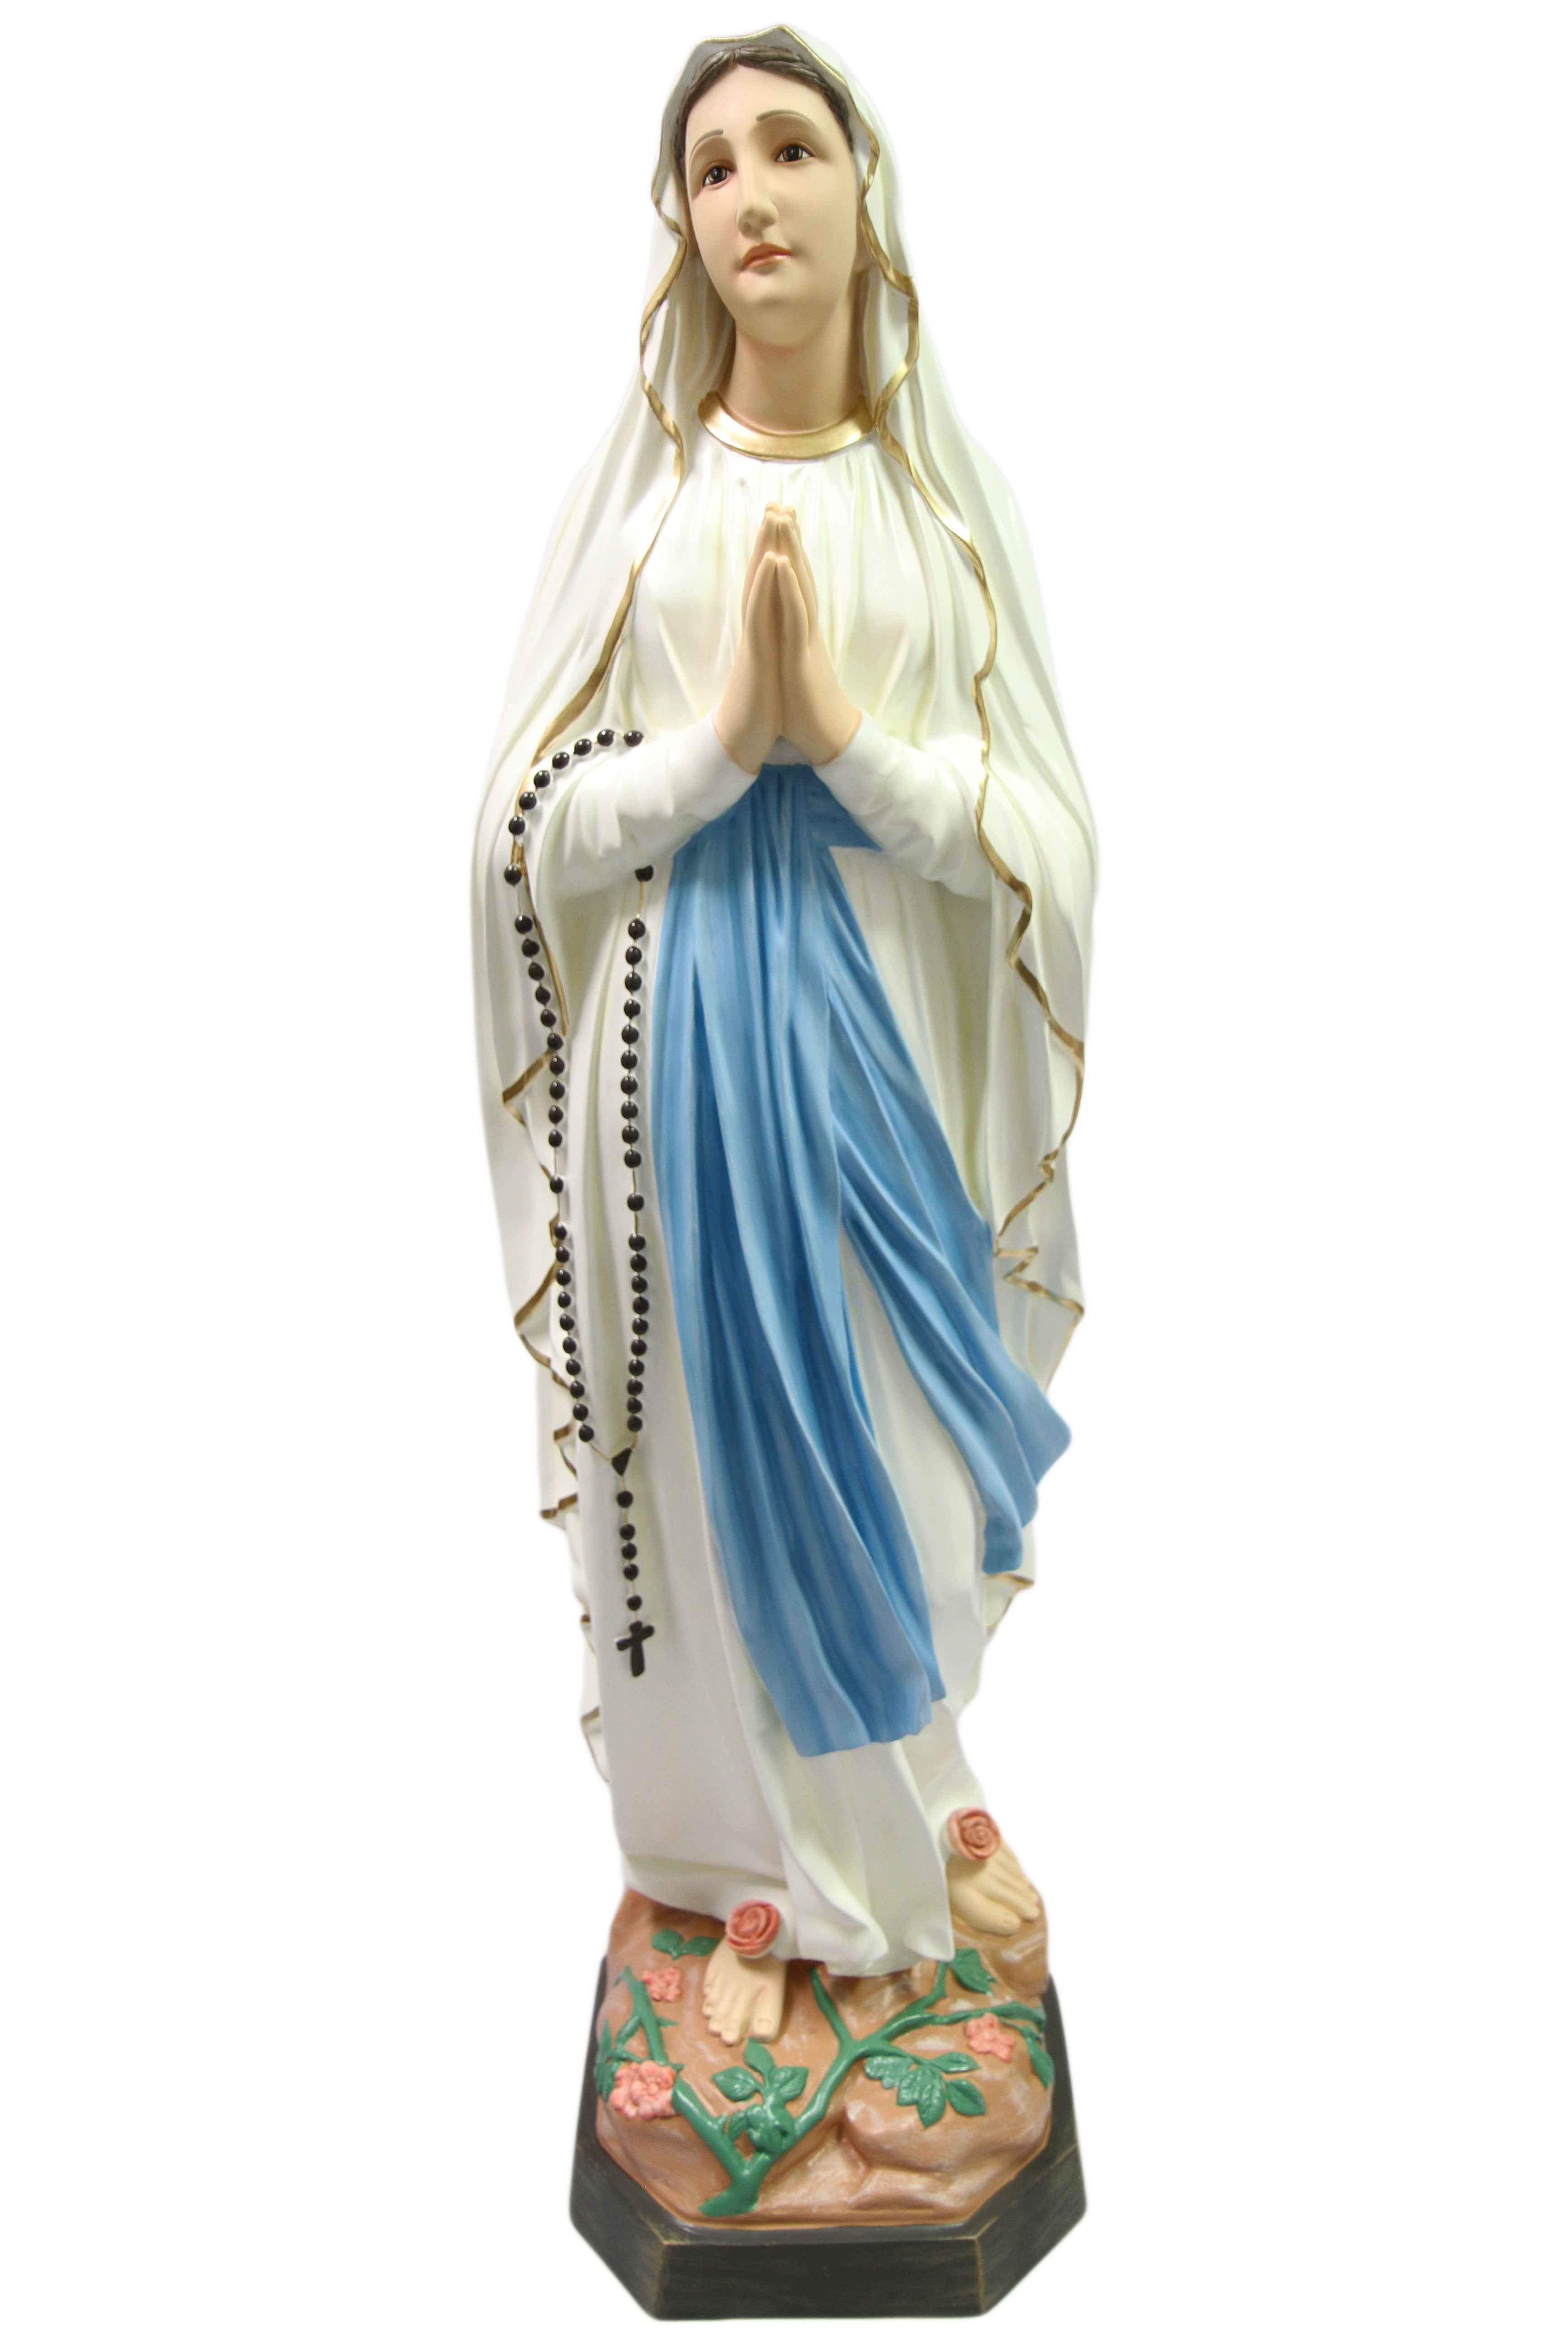 48 Inch Our Lady of Lourdes Virgin Mary Catholic Statue Sculpture Vittoria Collection Made in Italy